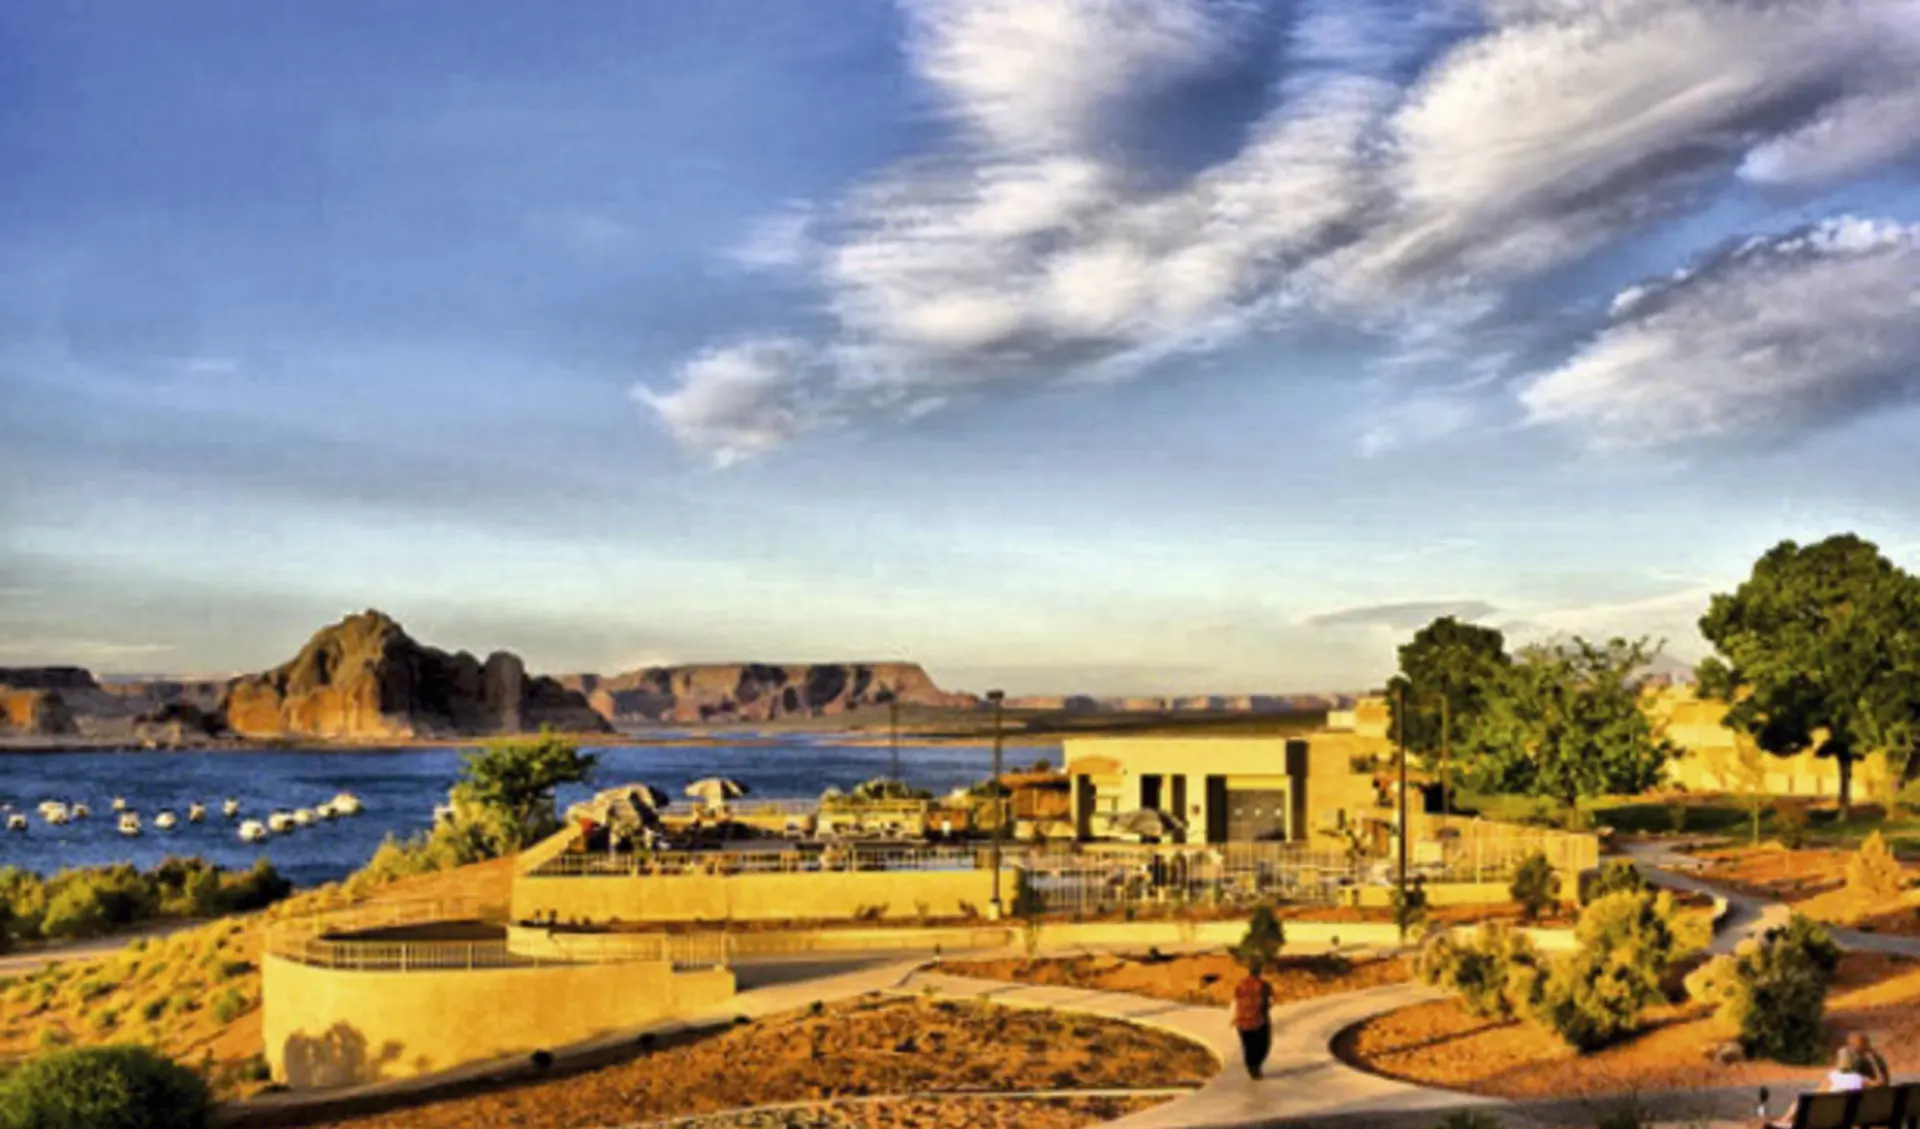 Lake Powell Resort & Marina in Page: exterior lake powell resort and marina landschaft see